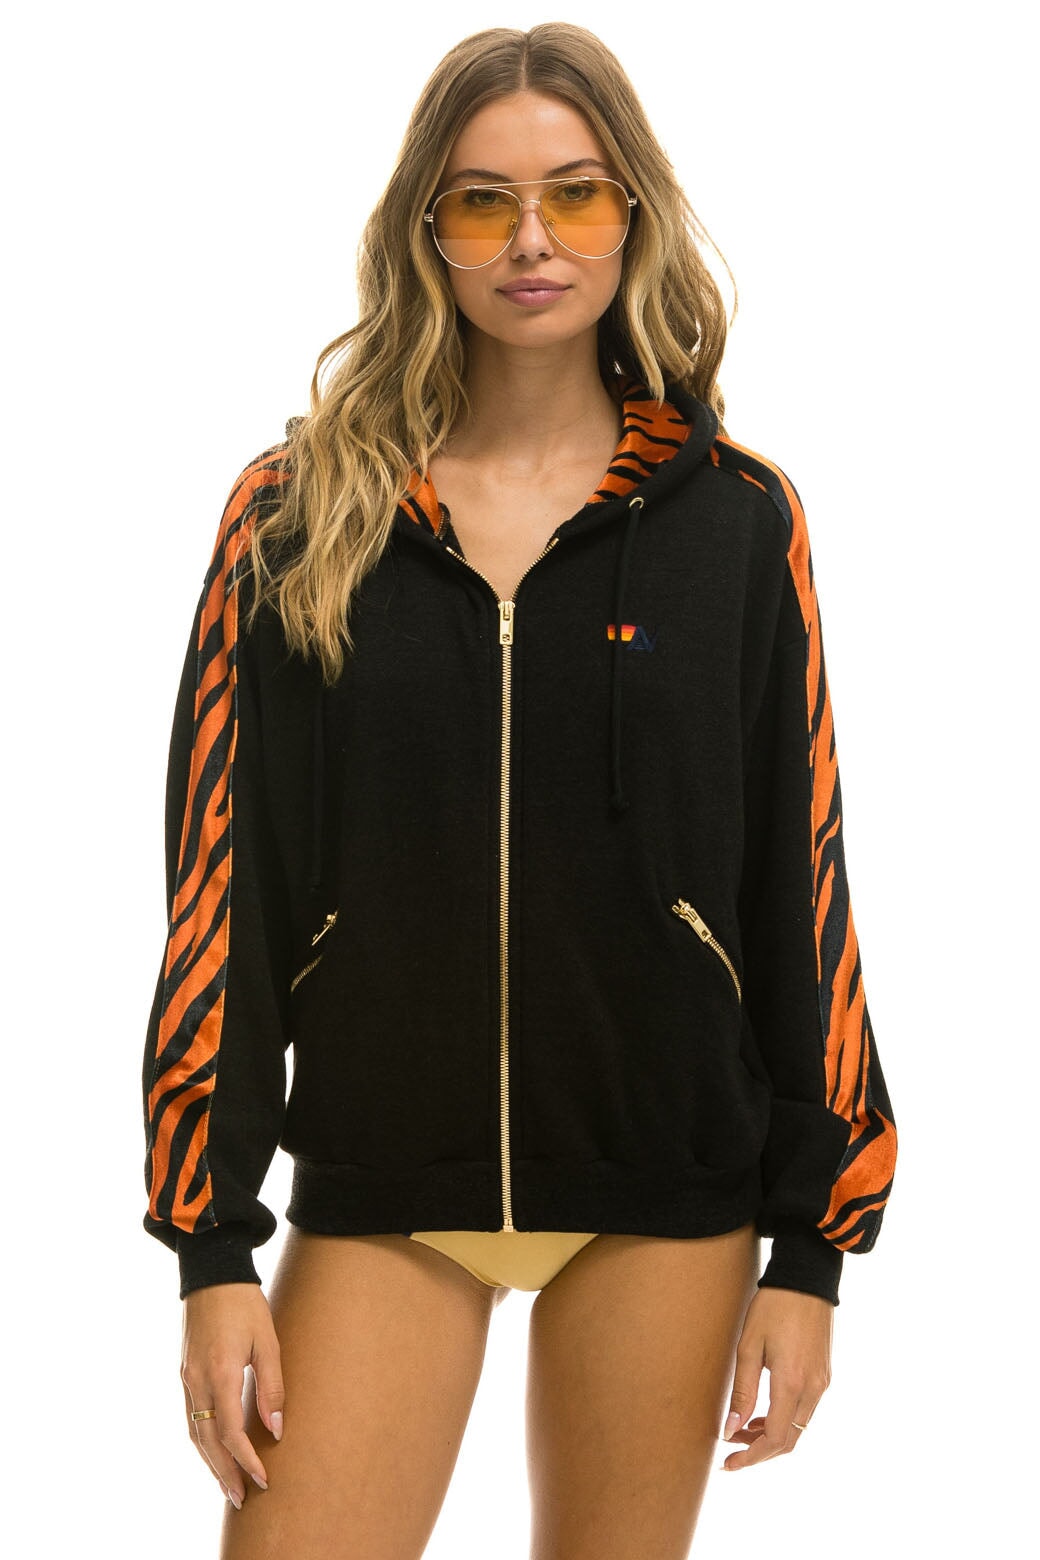 TIGER STRIPE RELAXED ZIP HOODIE WITH POCKETS - BLACK // TIGER Hoodie Aviator Nation 